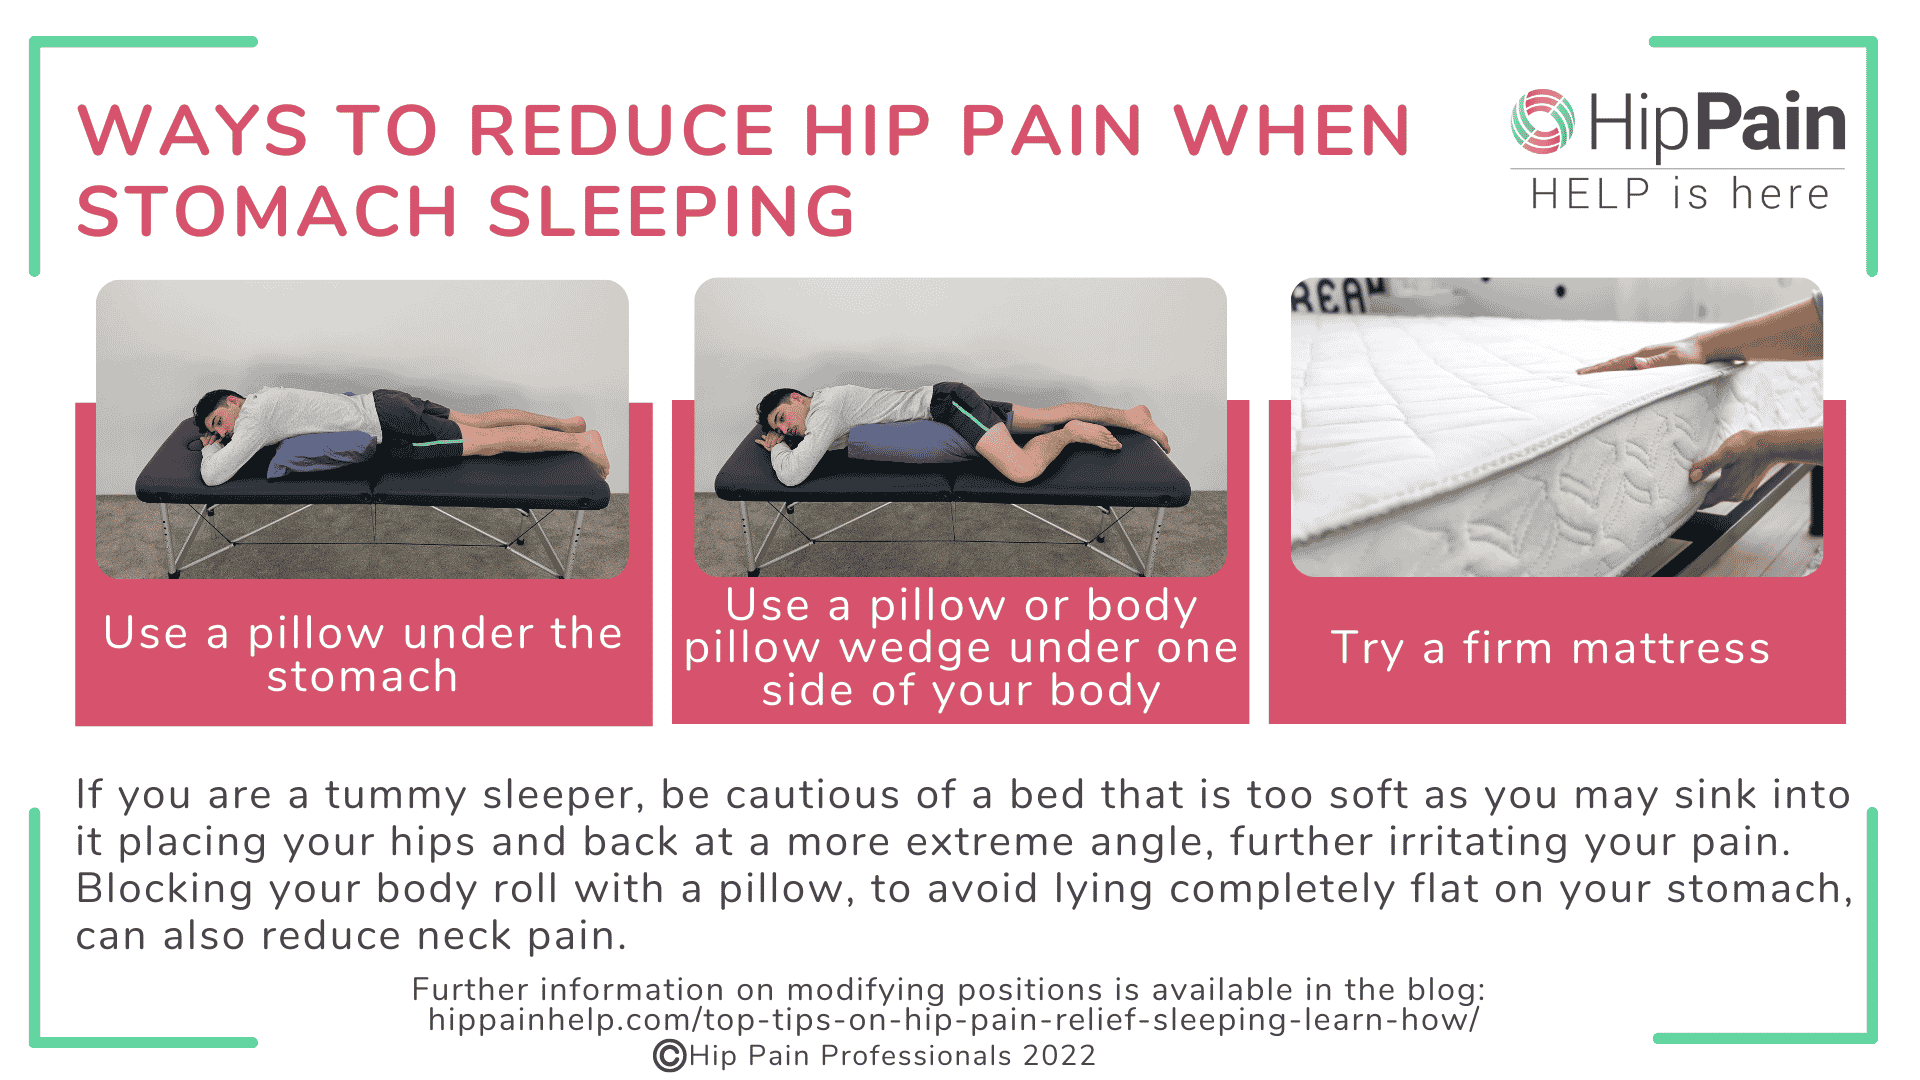 Hip Pain Help - Many people ask about how to side sleep with less pain.  Pillows to support you, maybe in front and behind can be of benefit. But of  most use